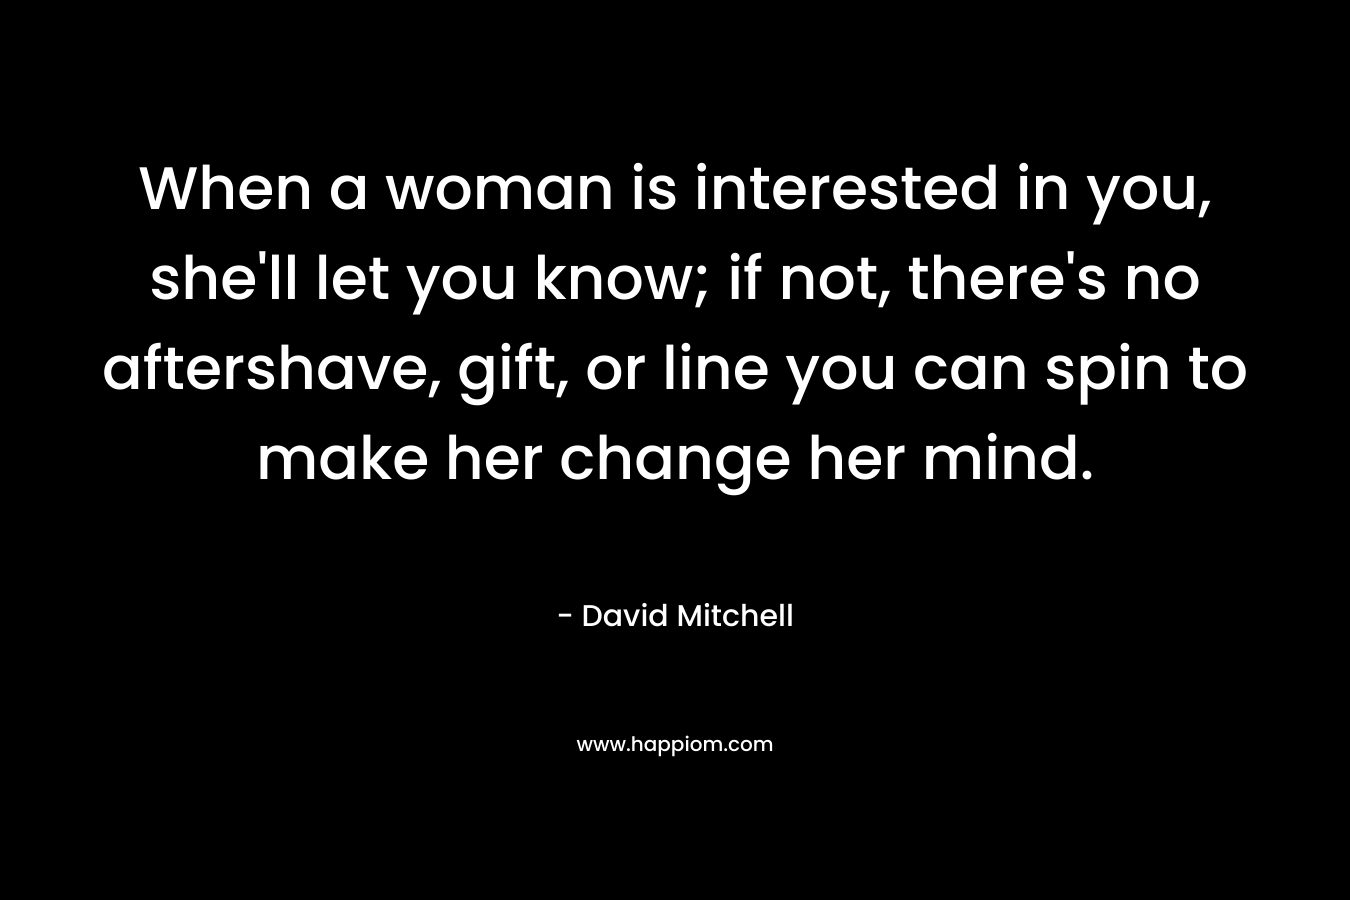 When a woman is interested in you, she’ll let you know; if not, there’s no aftershave, gift, or line you can spin to make her change her mind. – David Mitchell